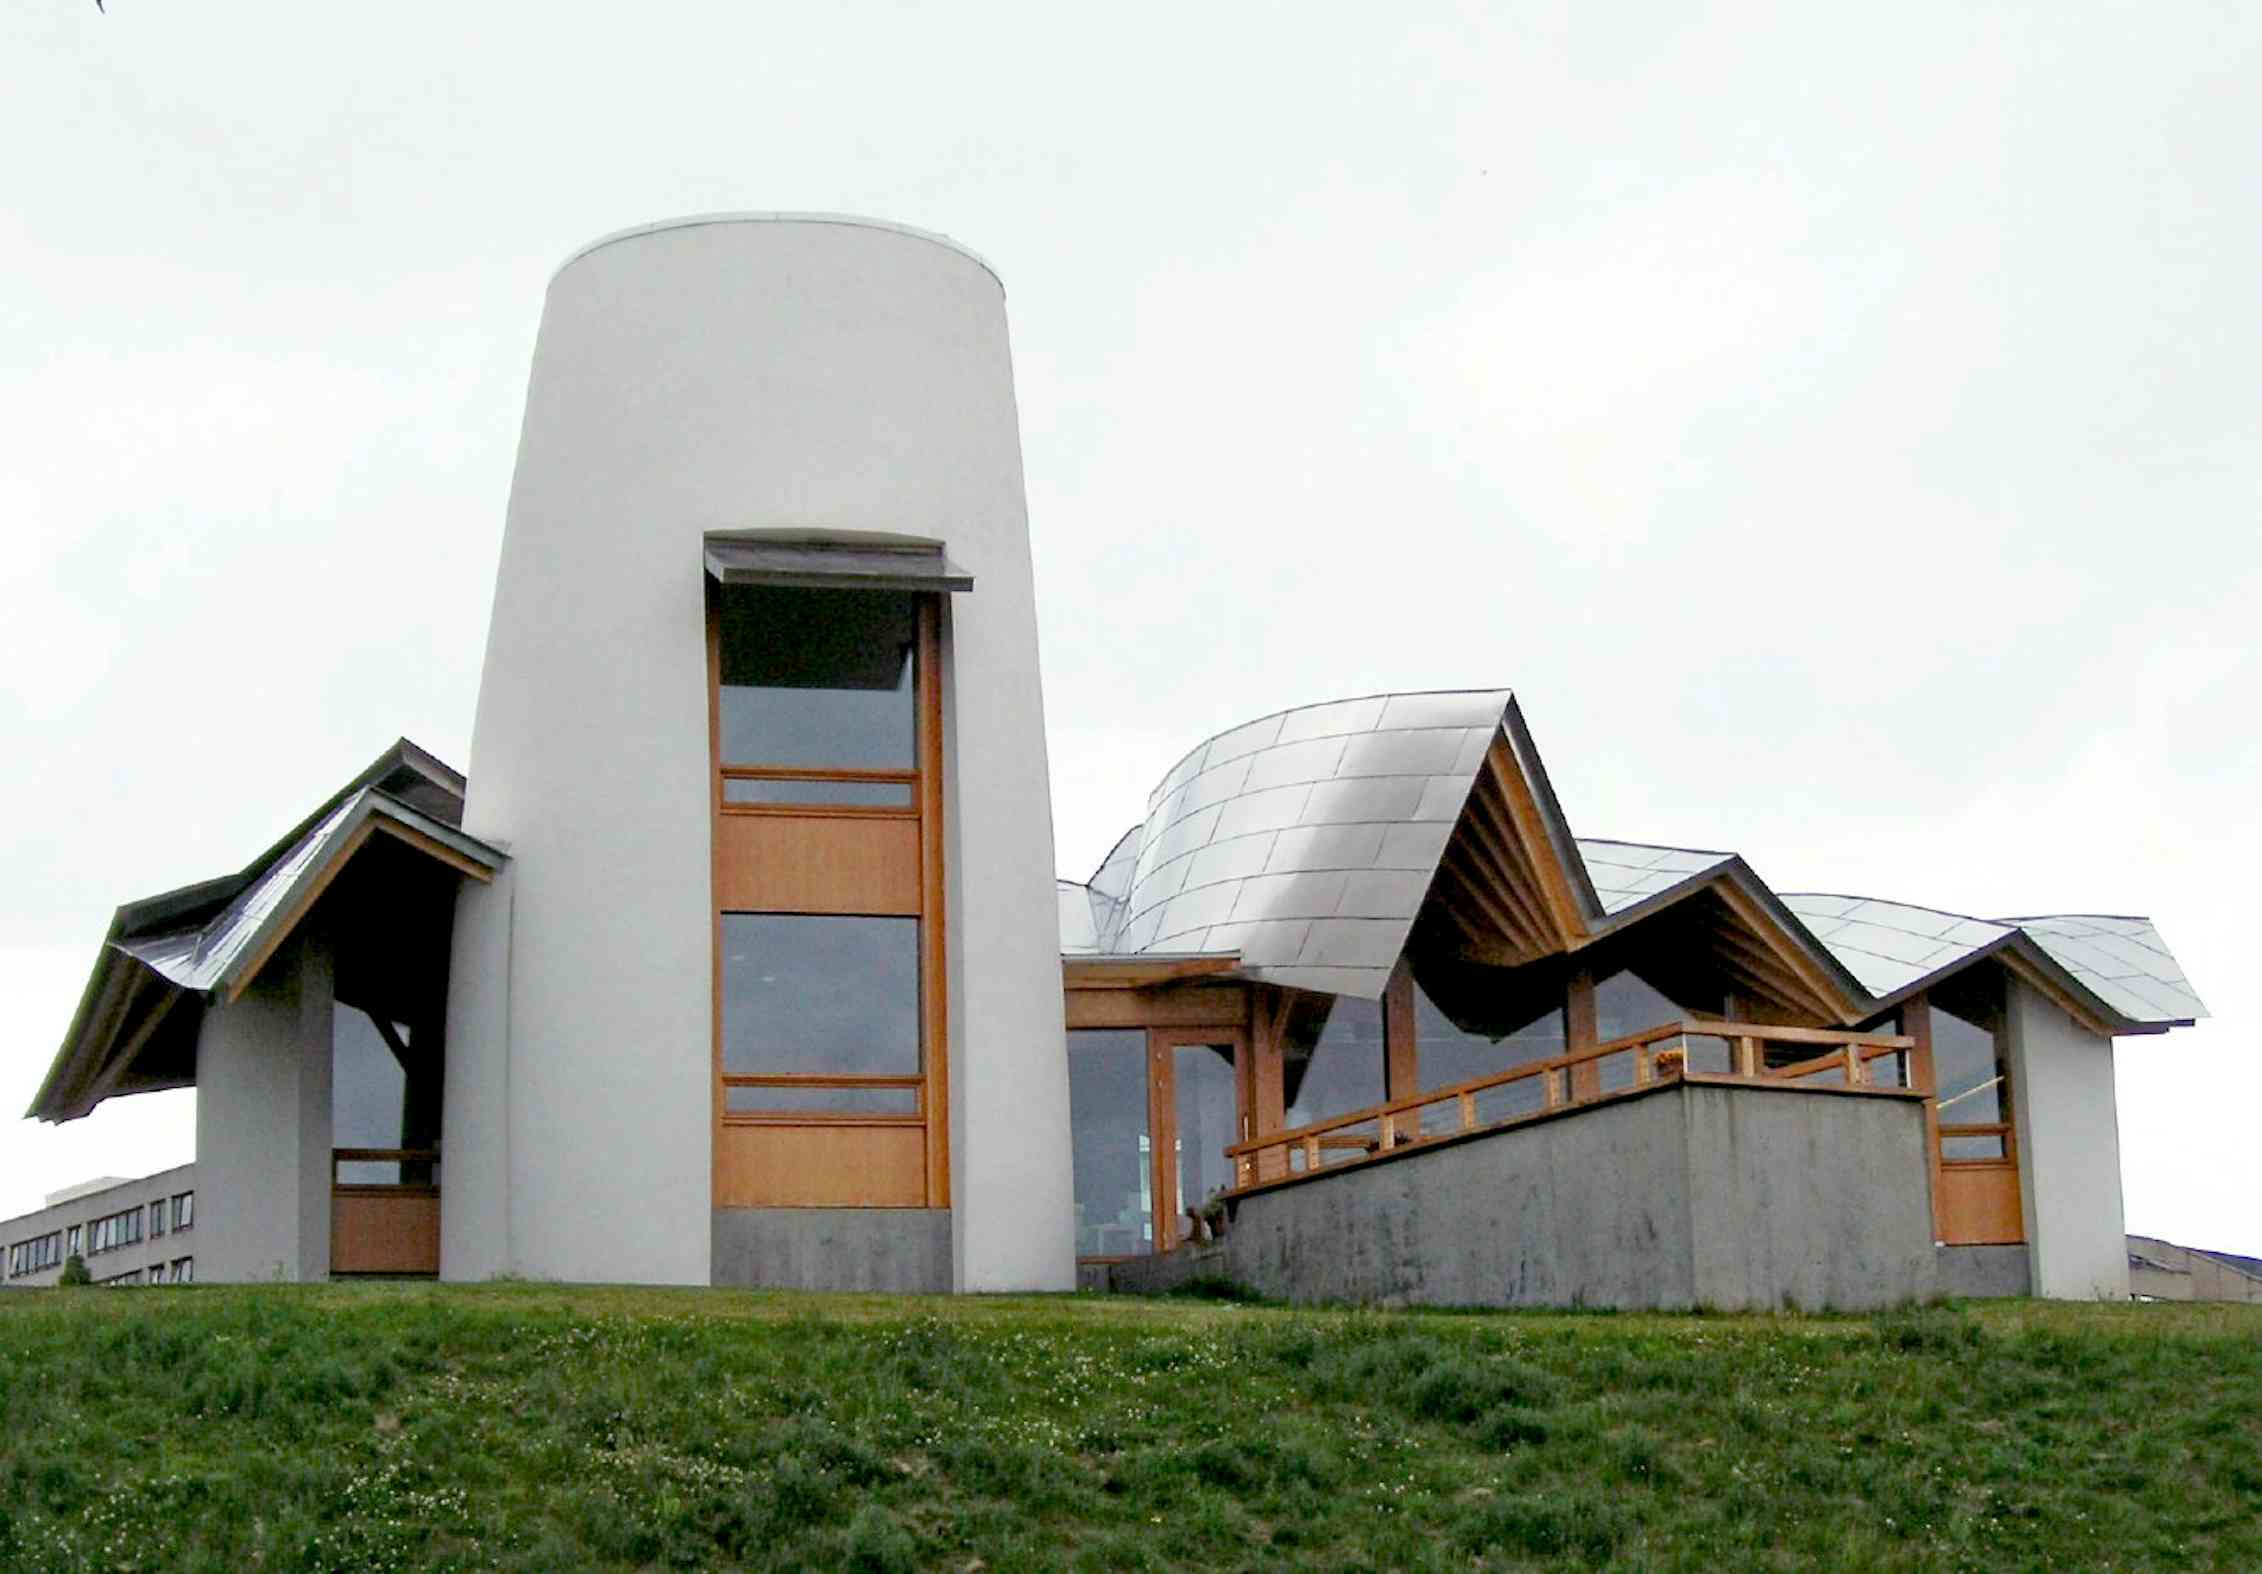 External view of unusually designed visitor centre